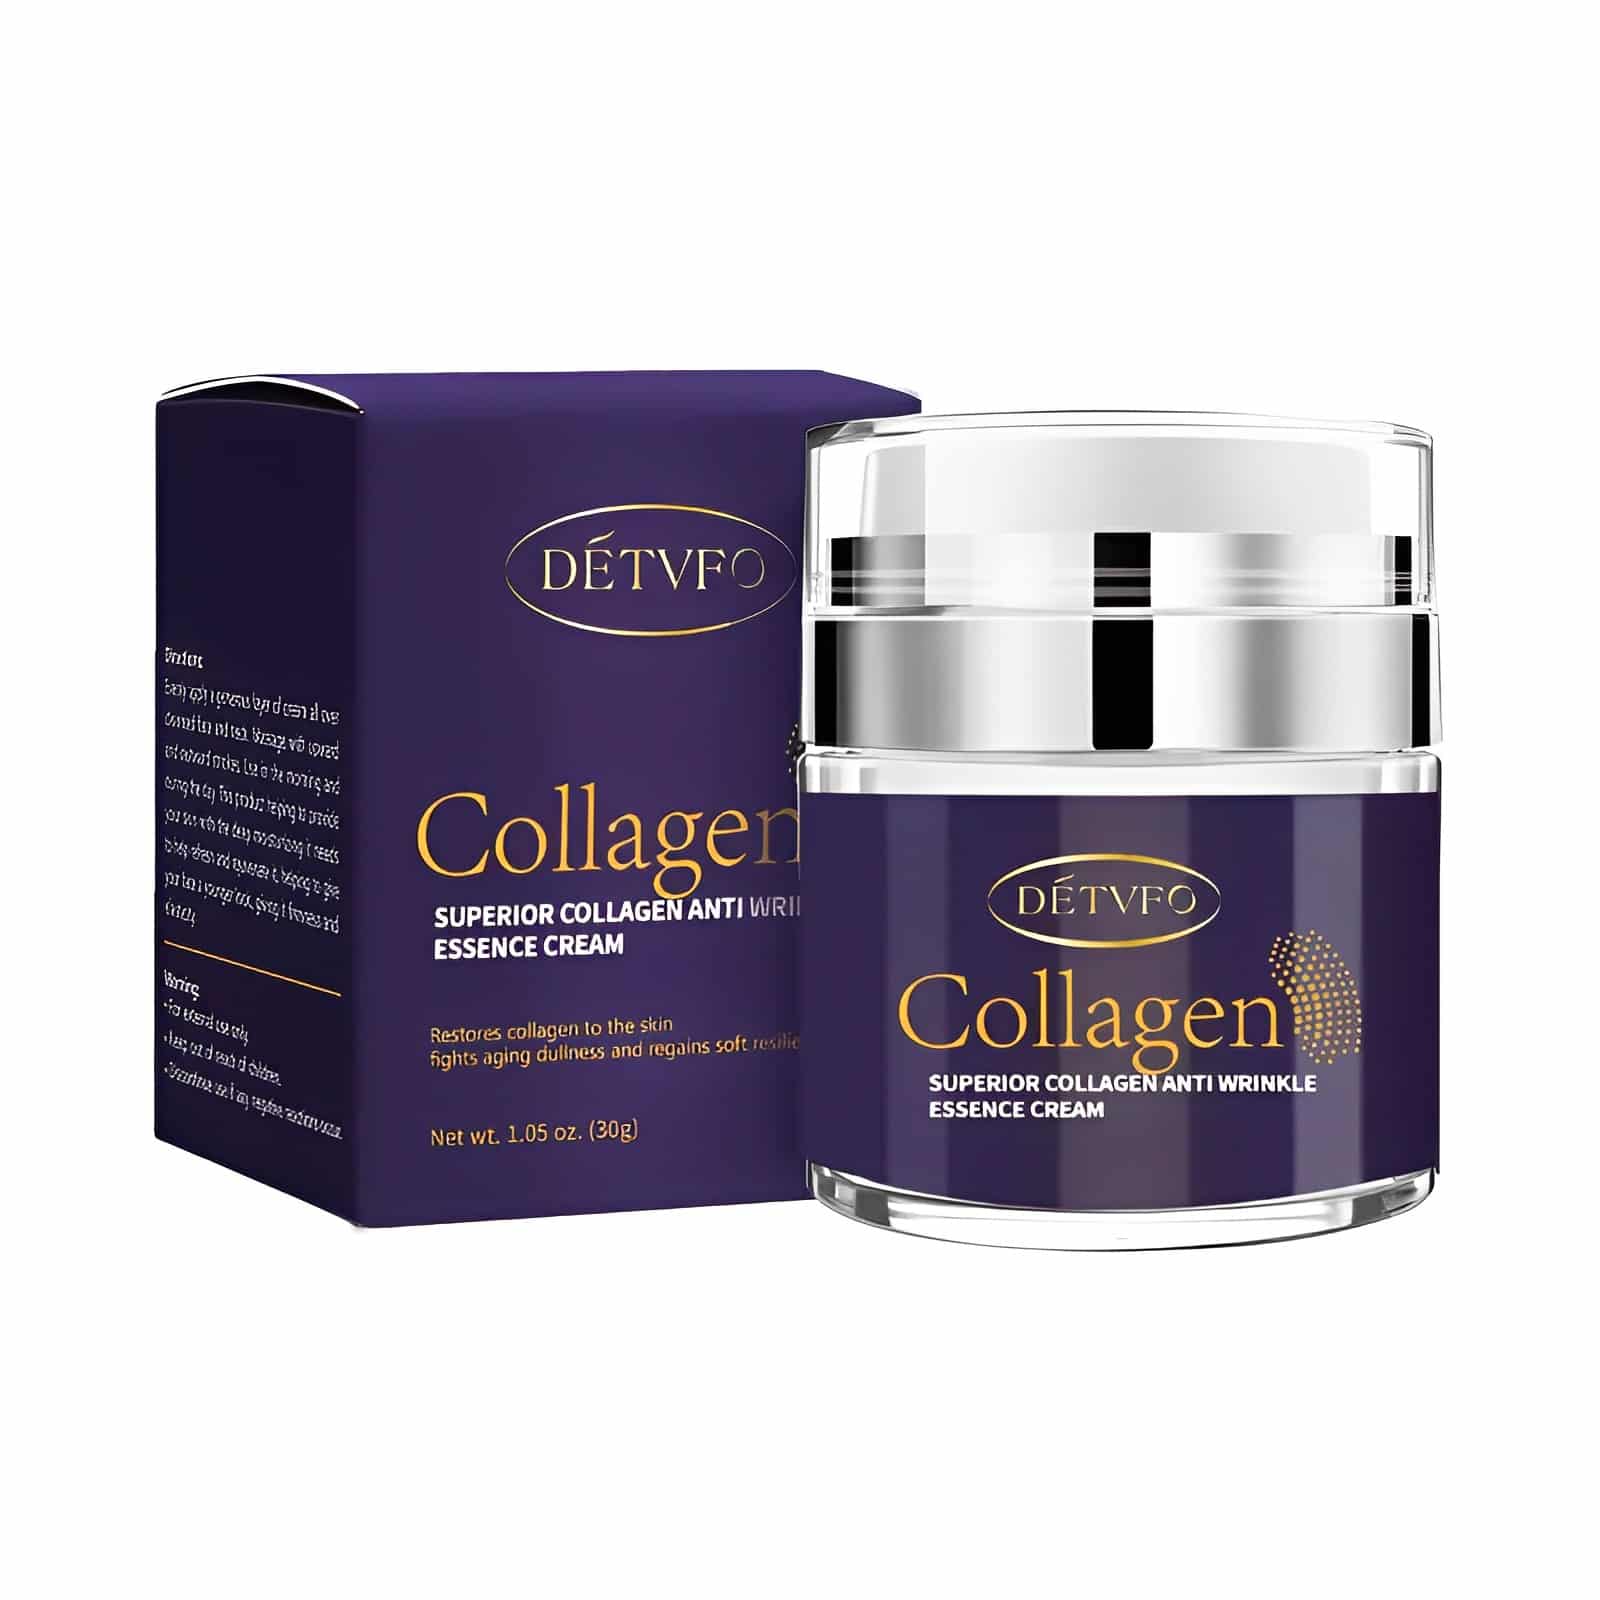 This Anti-Ageing Collagen Face Cream is renowned for anti-aging, skin strengthening, rejuvenating young skin, skin firming and skin radiance.